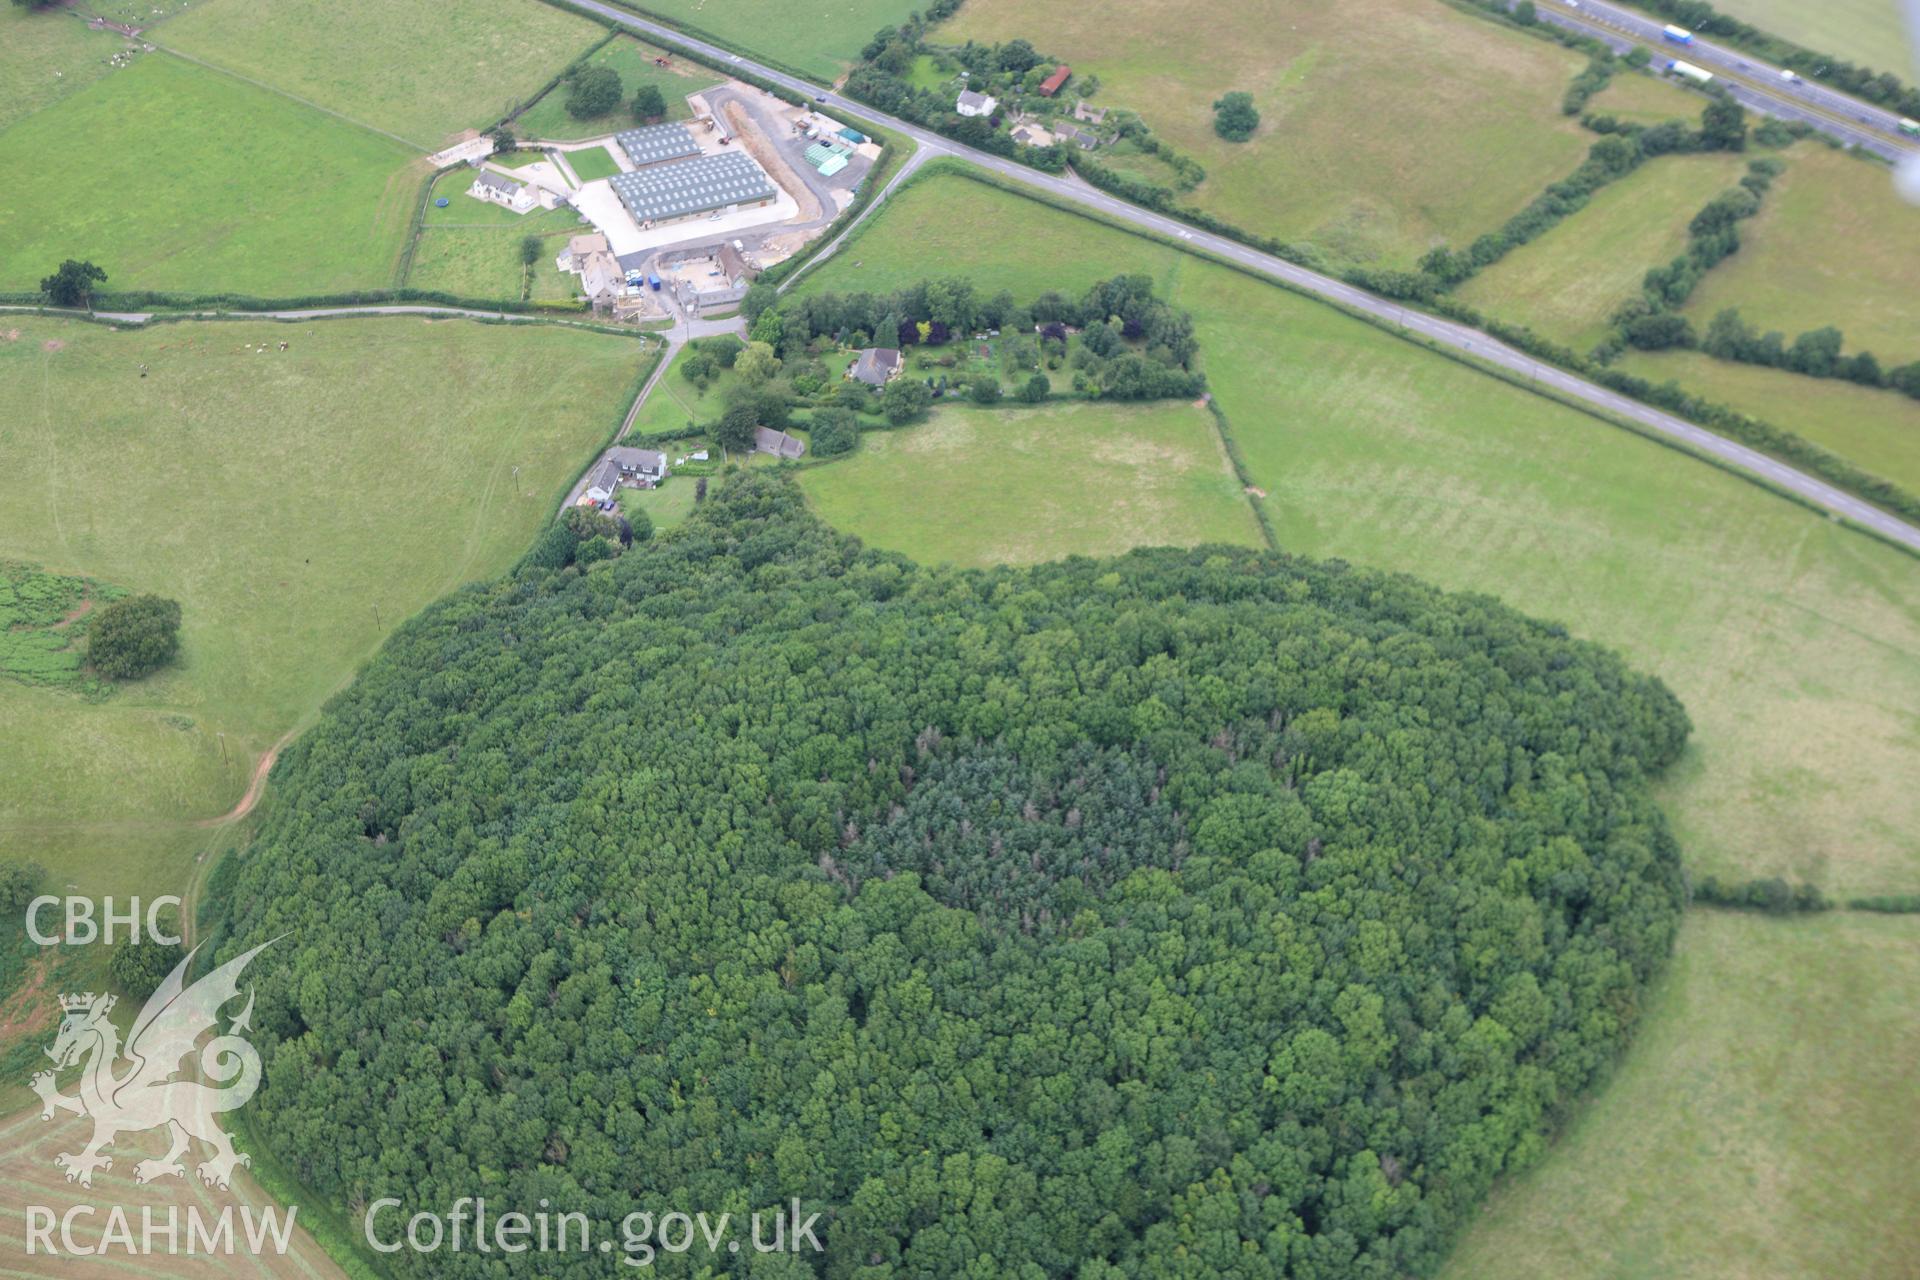 RCAHMW colour oblique aerial photograph of Wilcrick Hill Defended Enclosure. Taken on 09 July 2009 by Toby Driver